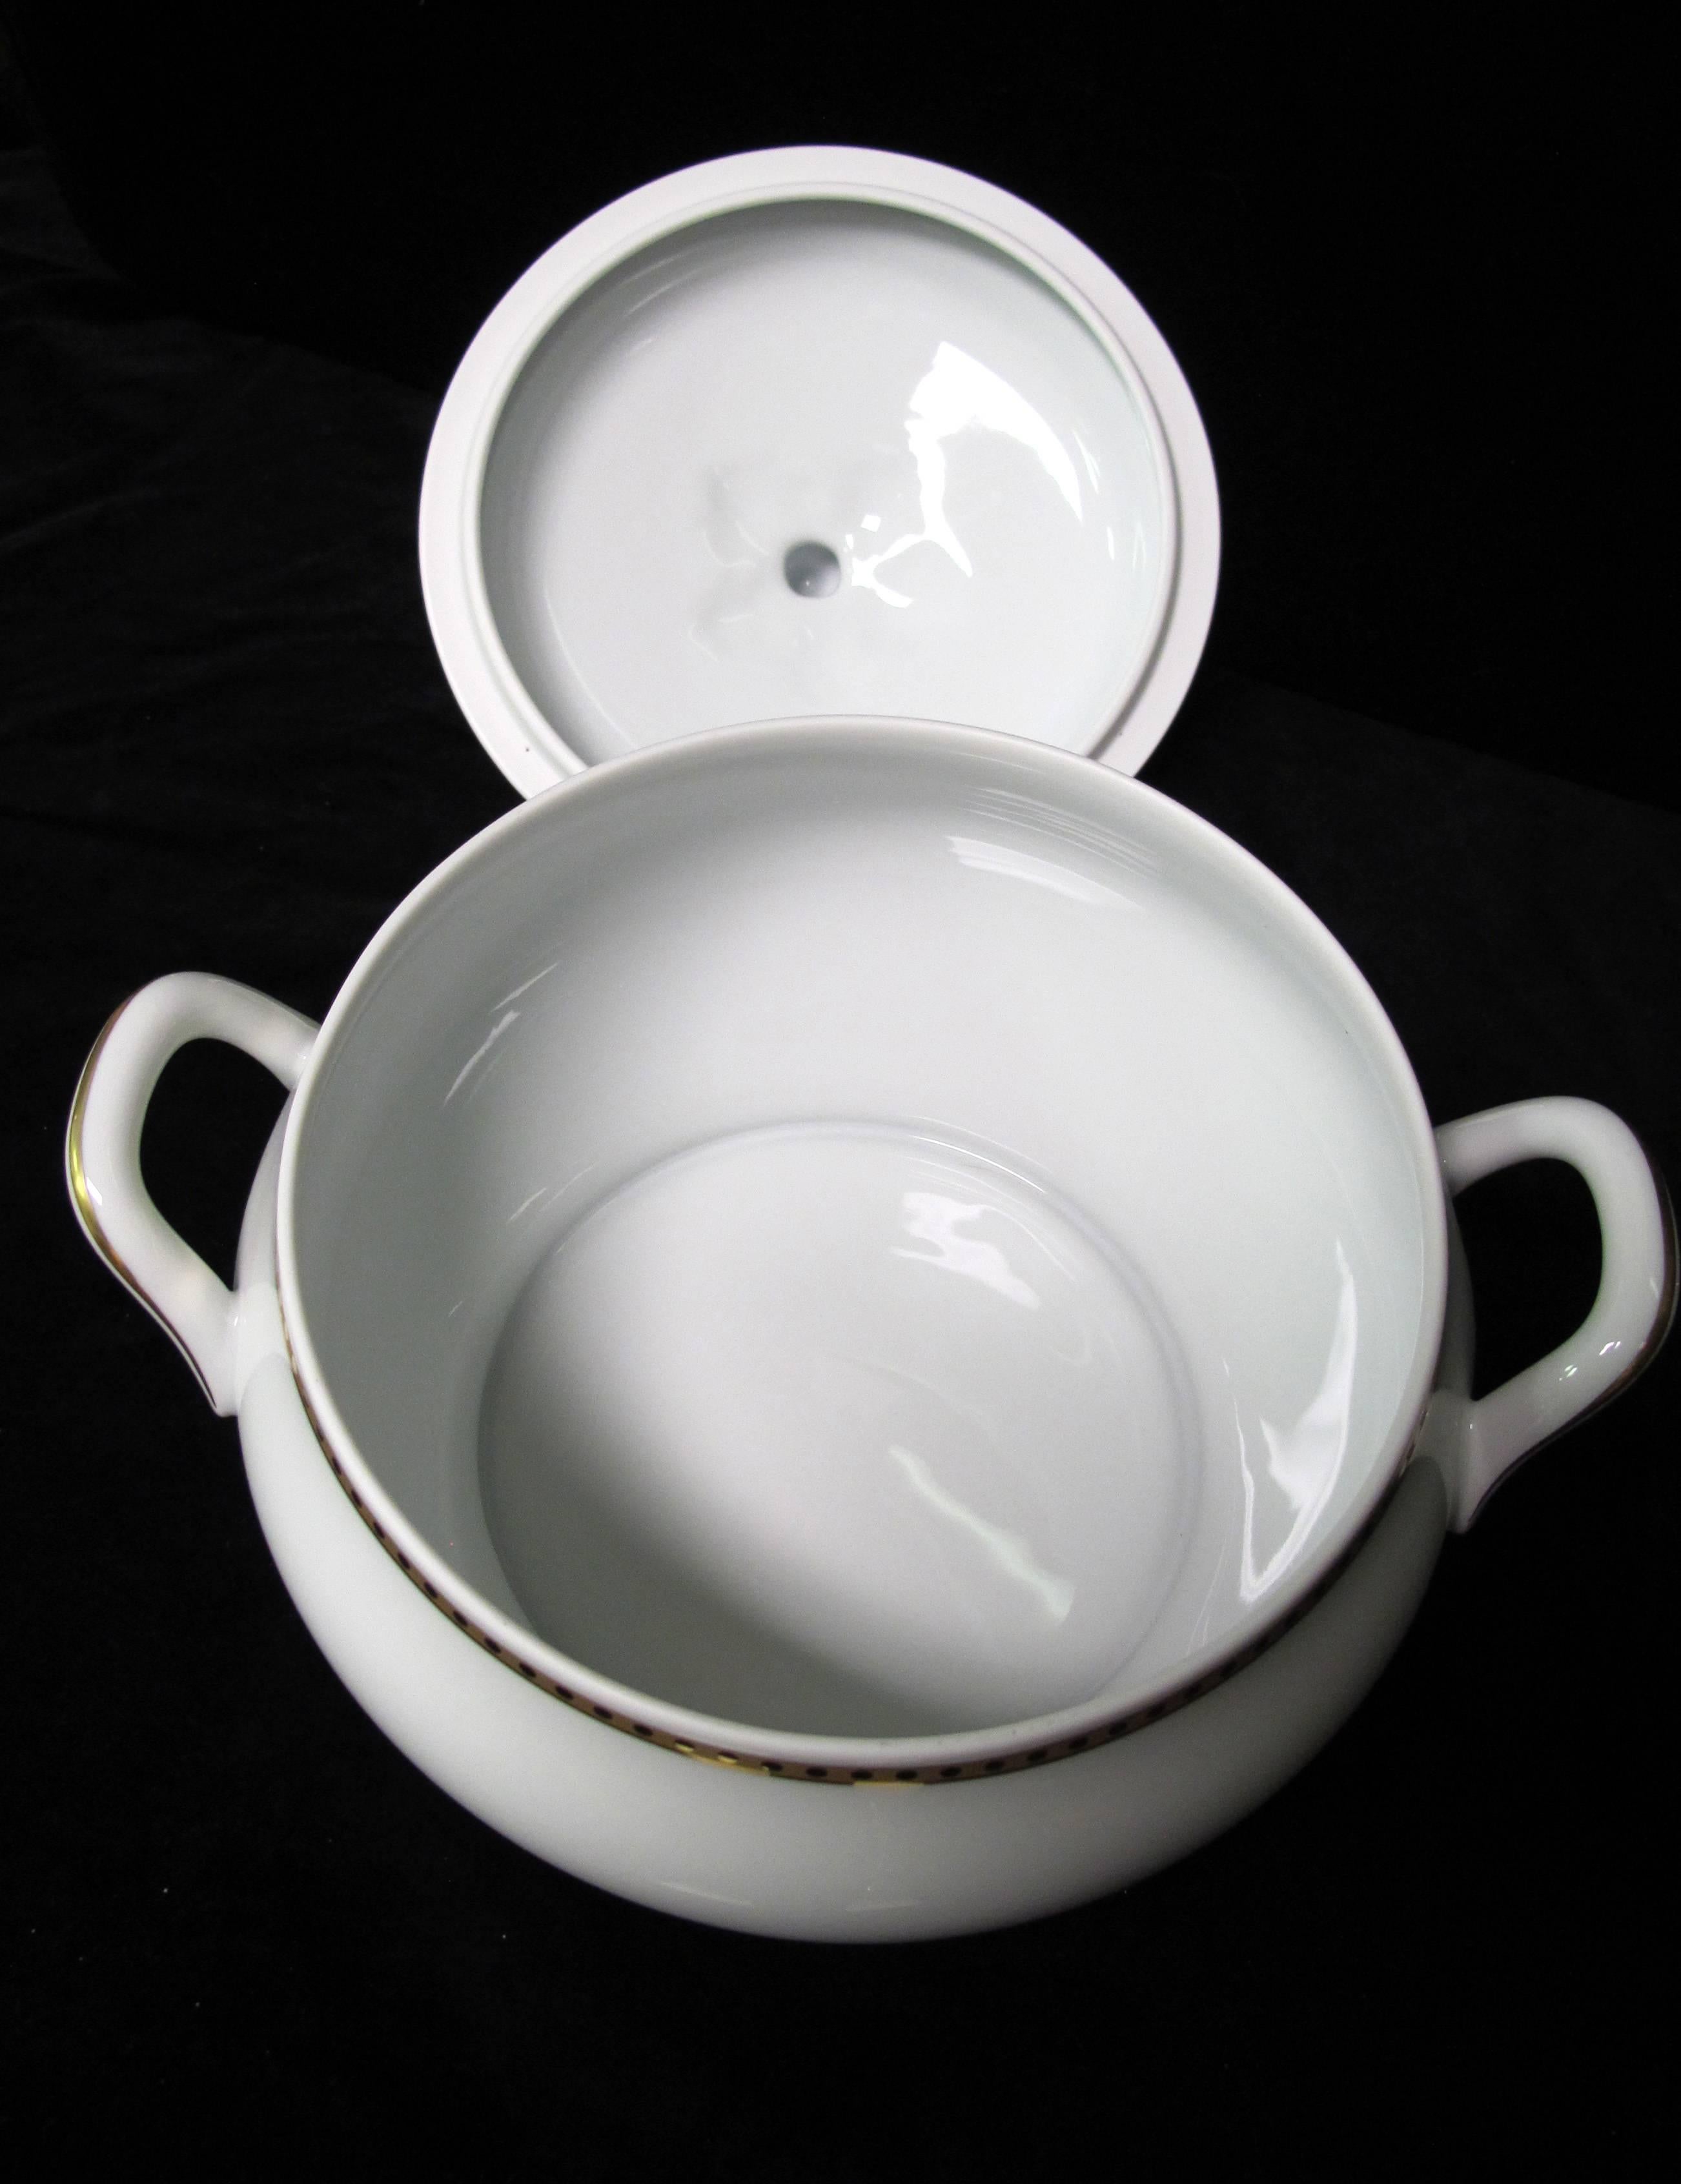 Tiffany & Co. Soup Tureen and Lid In Excellent Condition For Sale In Cleveland, OH